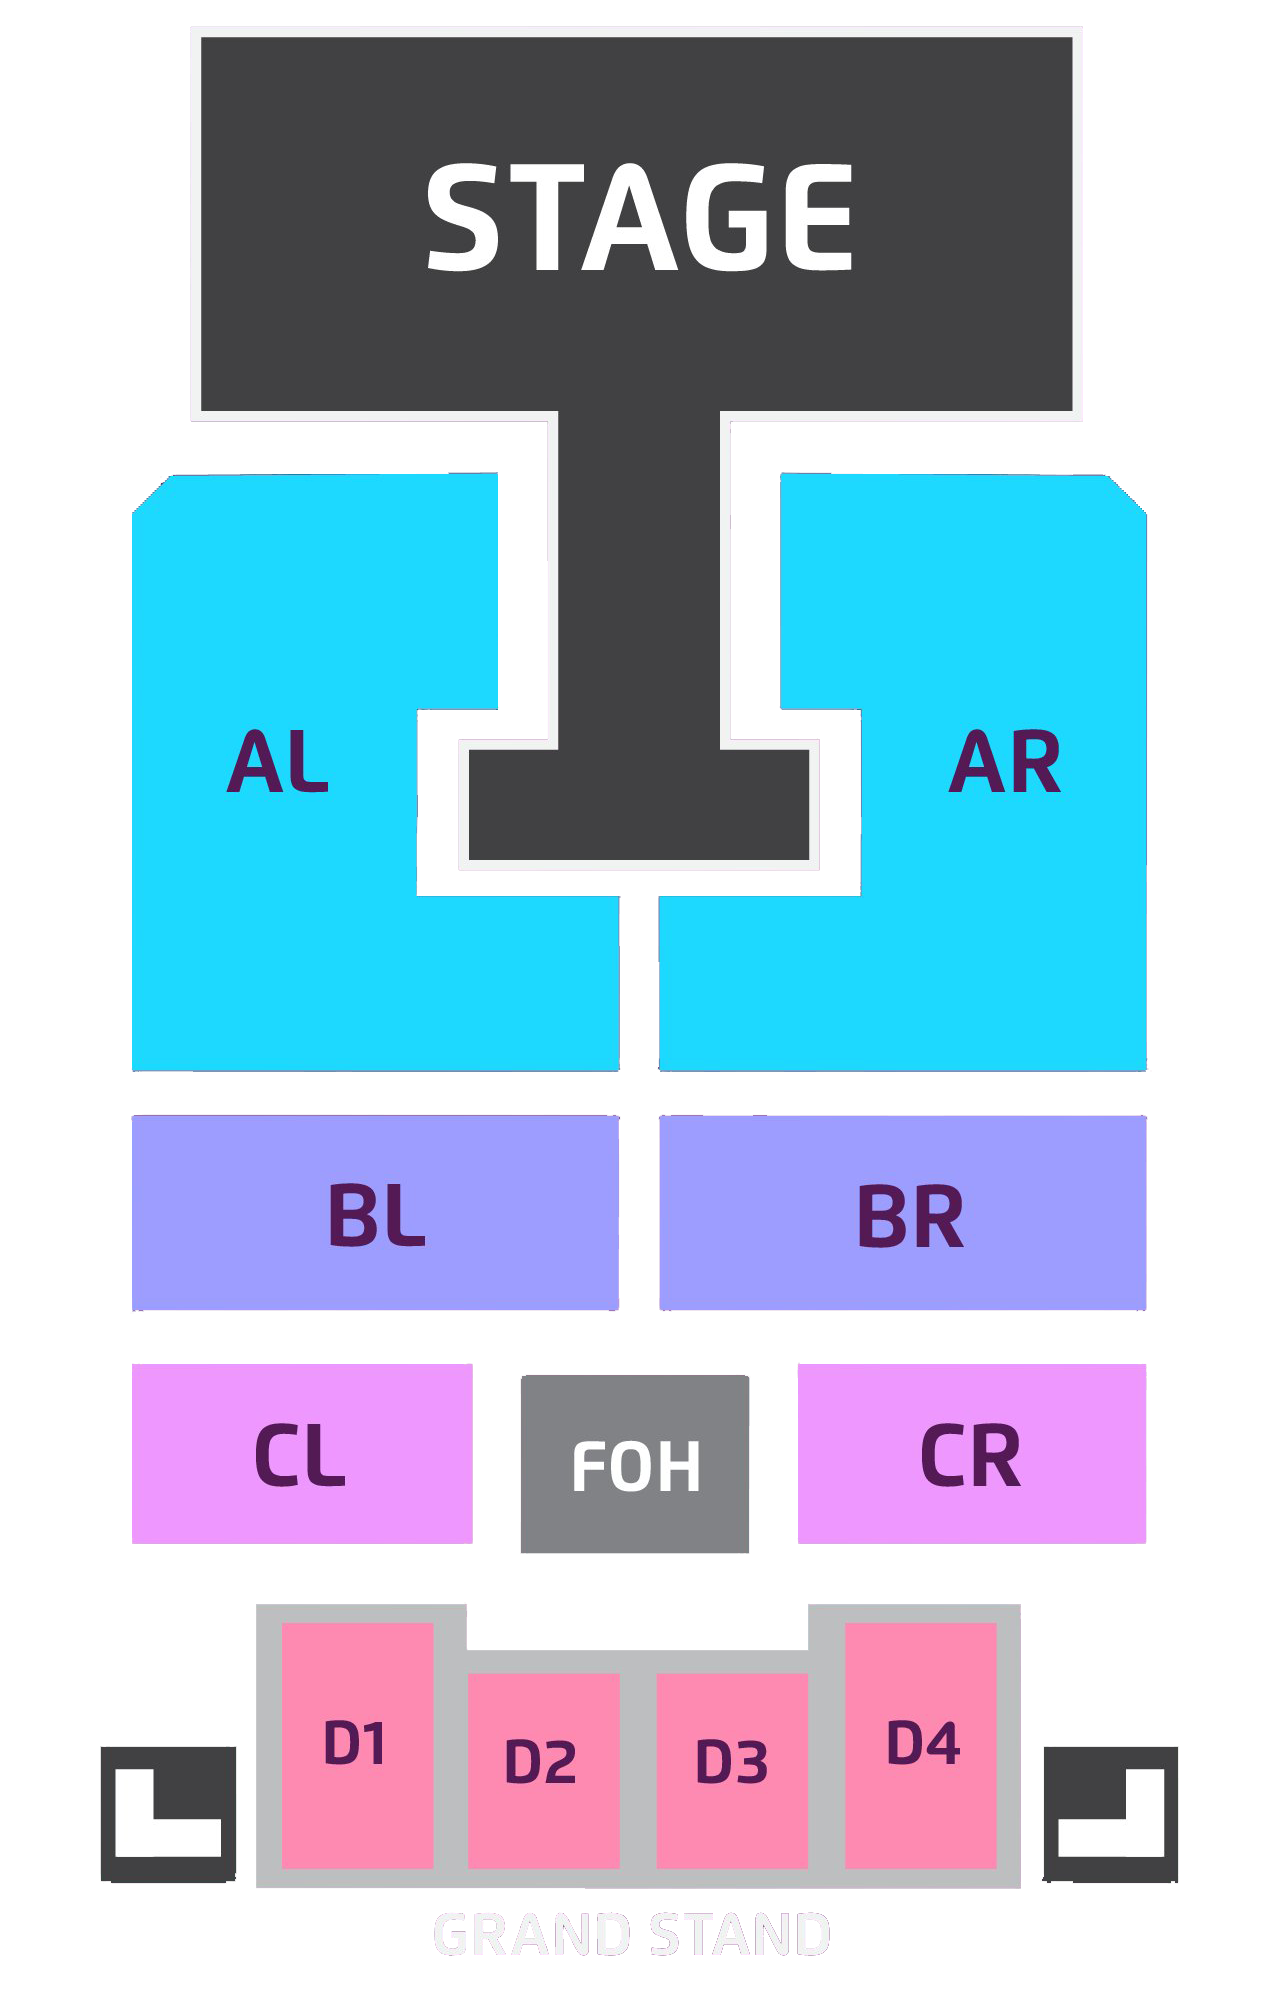 Seating Map in Thailand